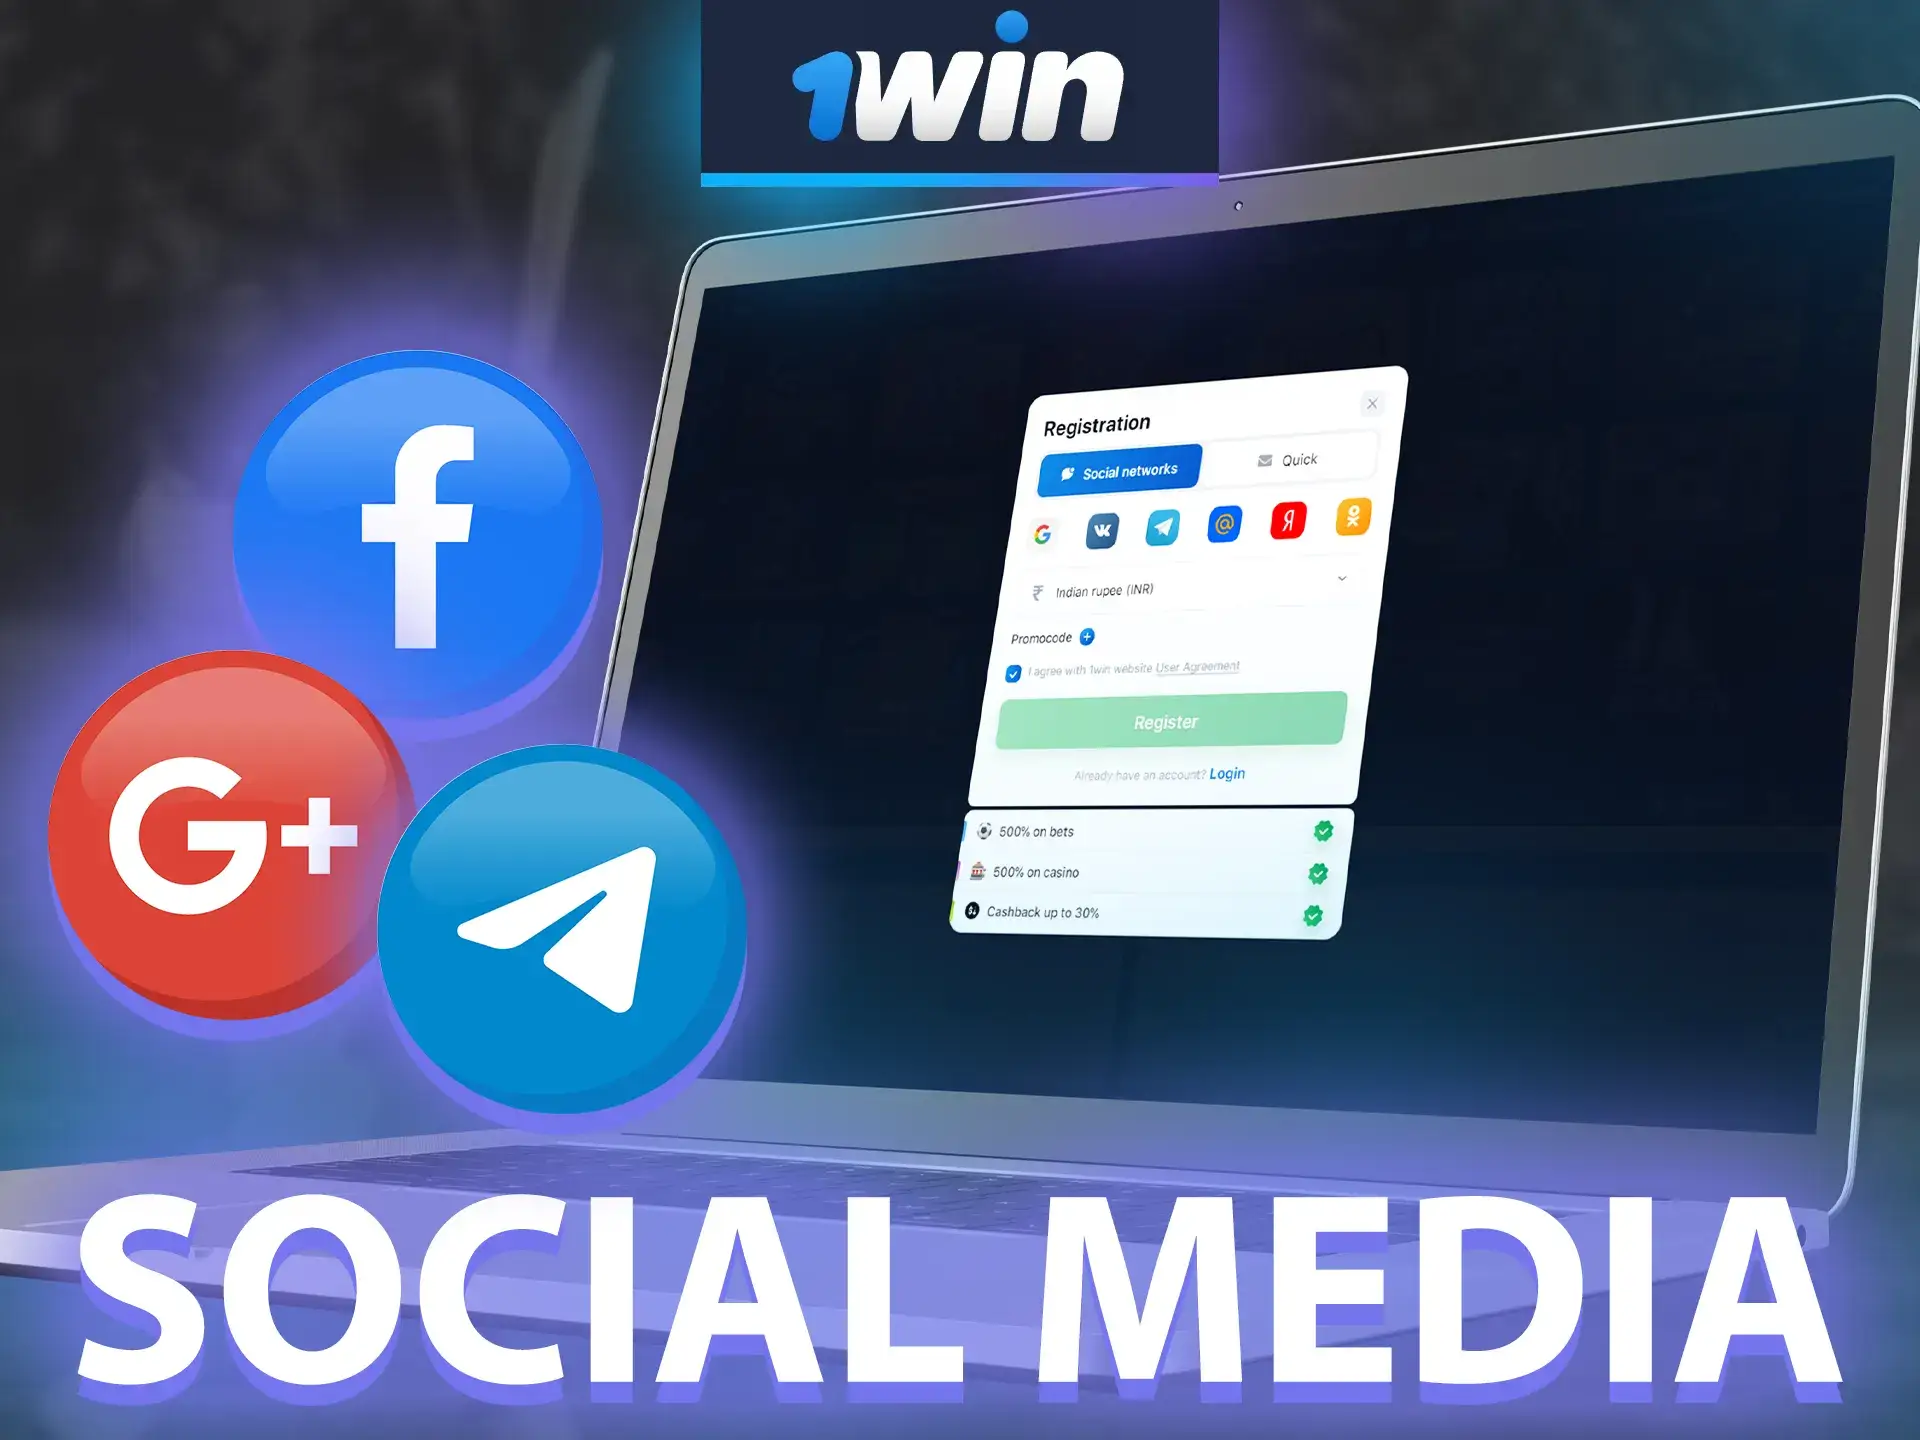 You can create an account with 1win via Google or Facebook social networks.